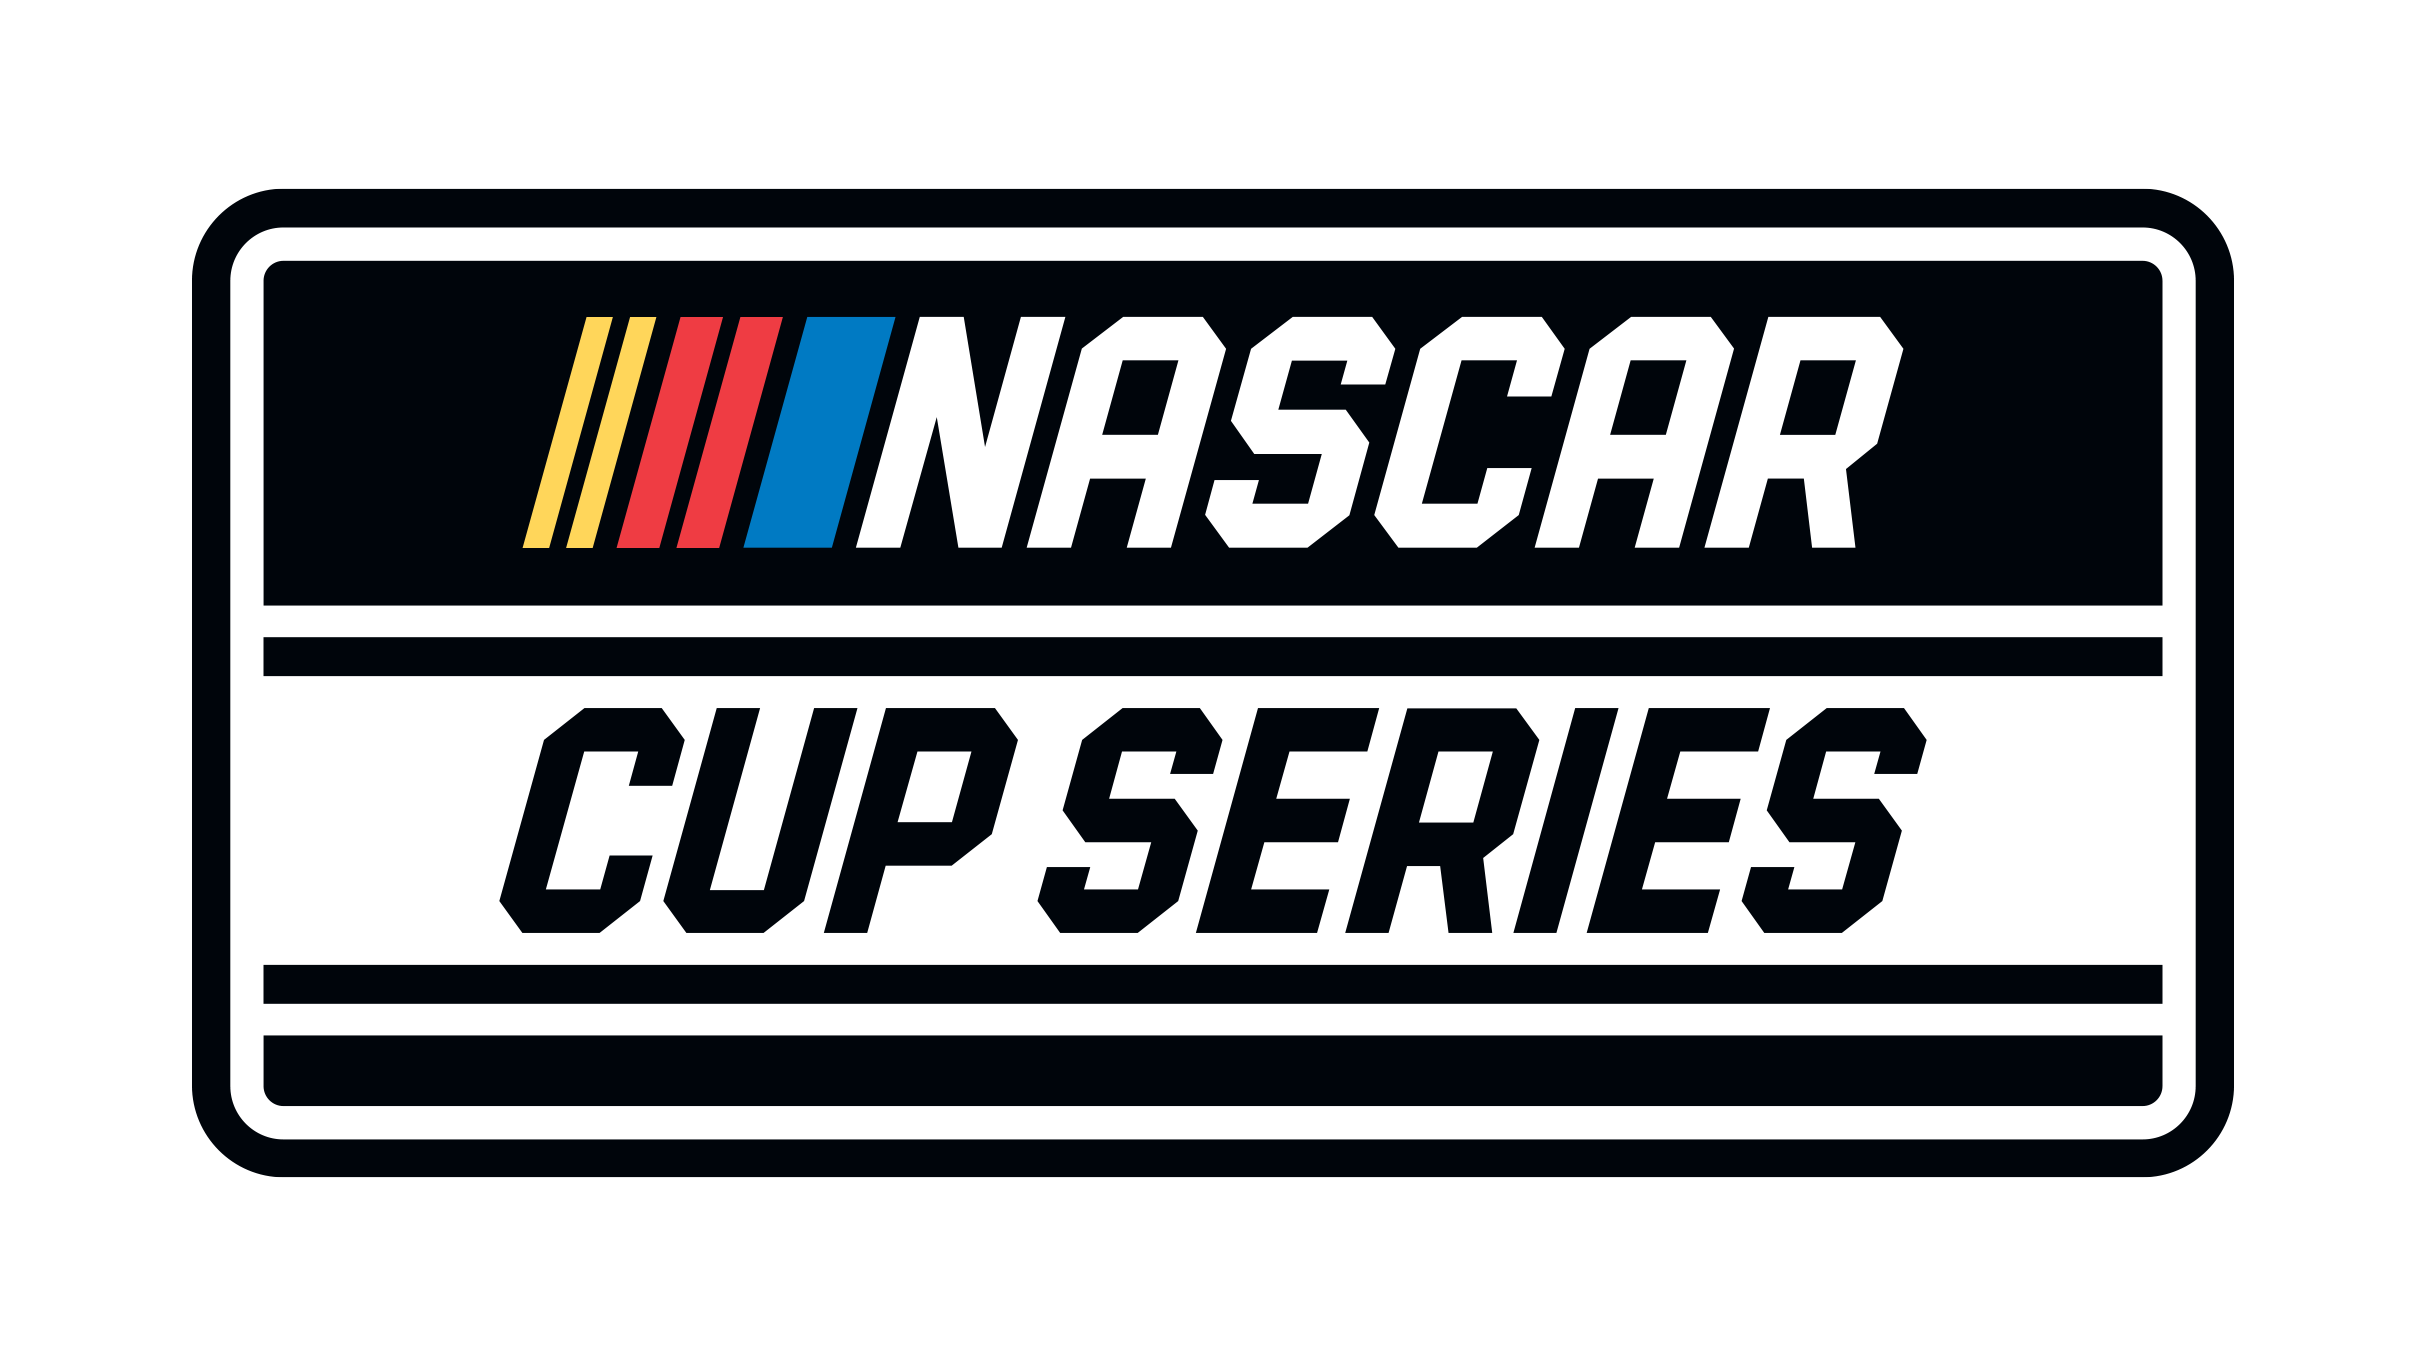 NASCAR All-Star Race - NASCAR Cup Series pre-sale code for performance tickets in North Wilkesboro, NC (North Wilkesboro Speedway)